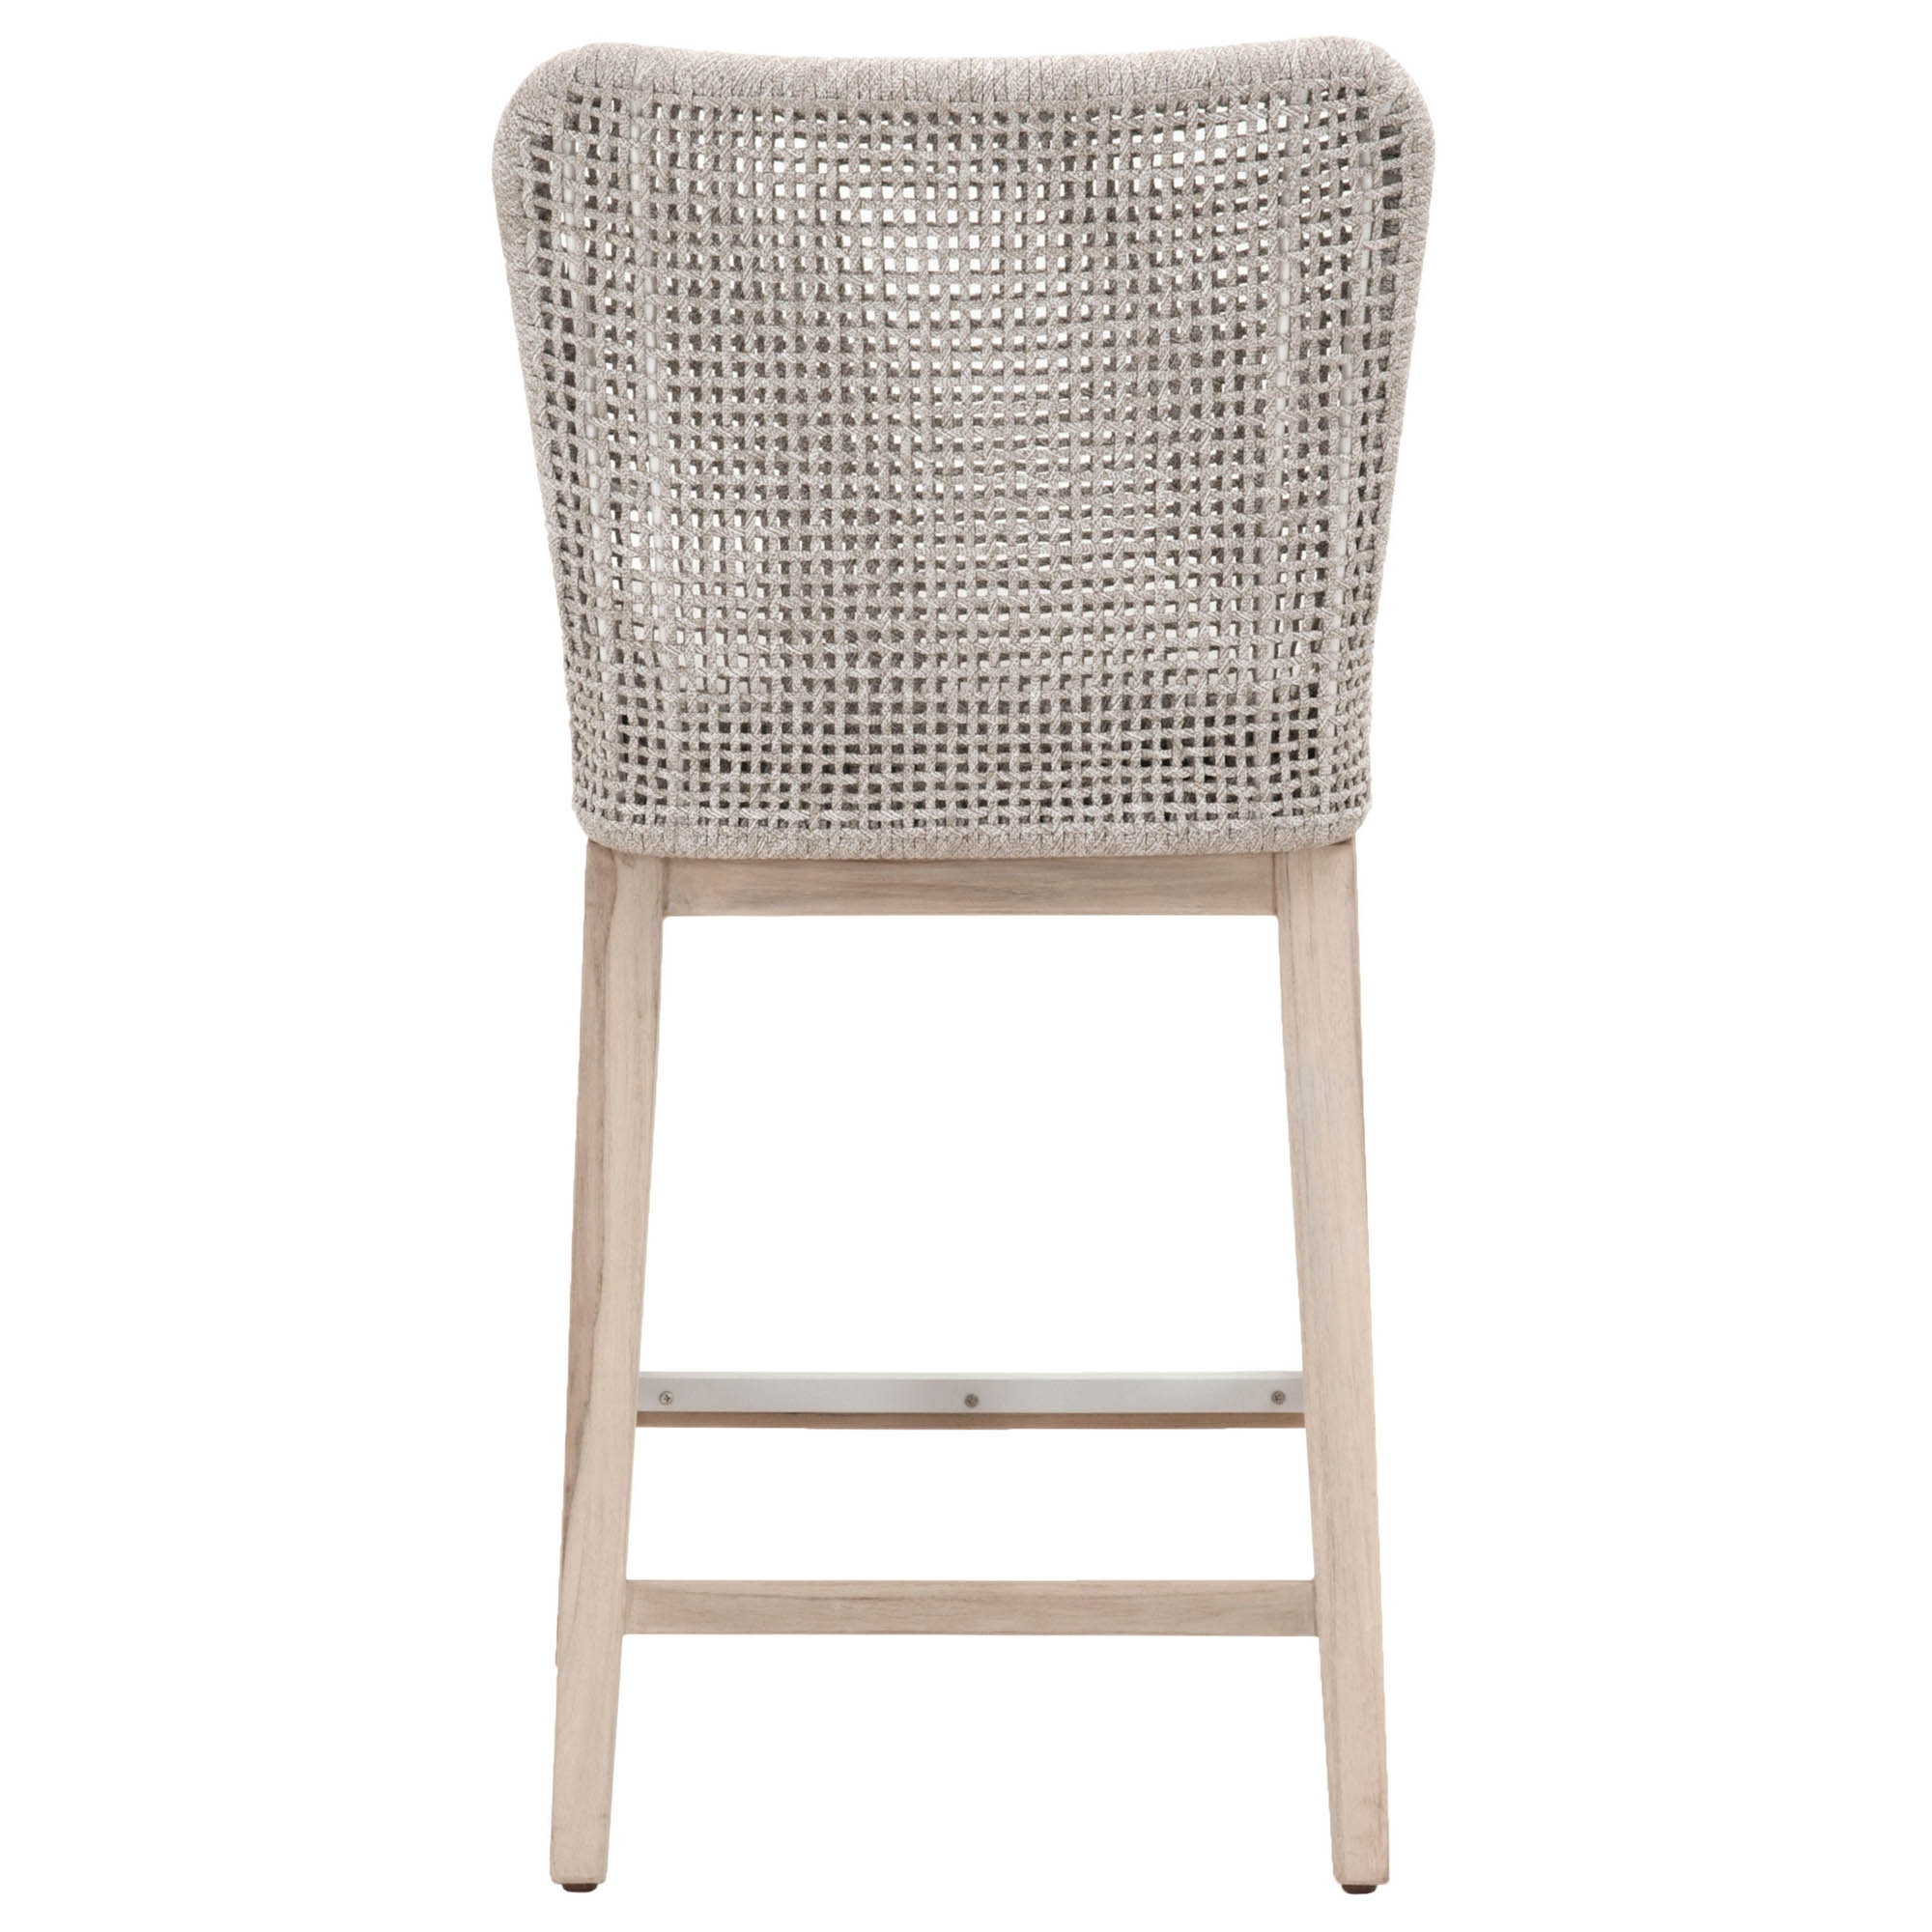 Winnetka Indoor/Outdoor Counter Stool, White Taupe - Image 4